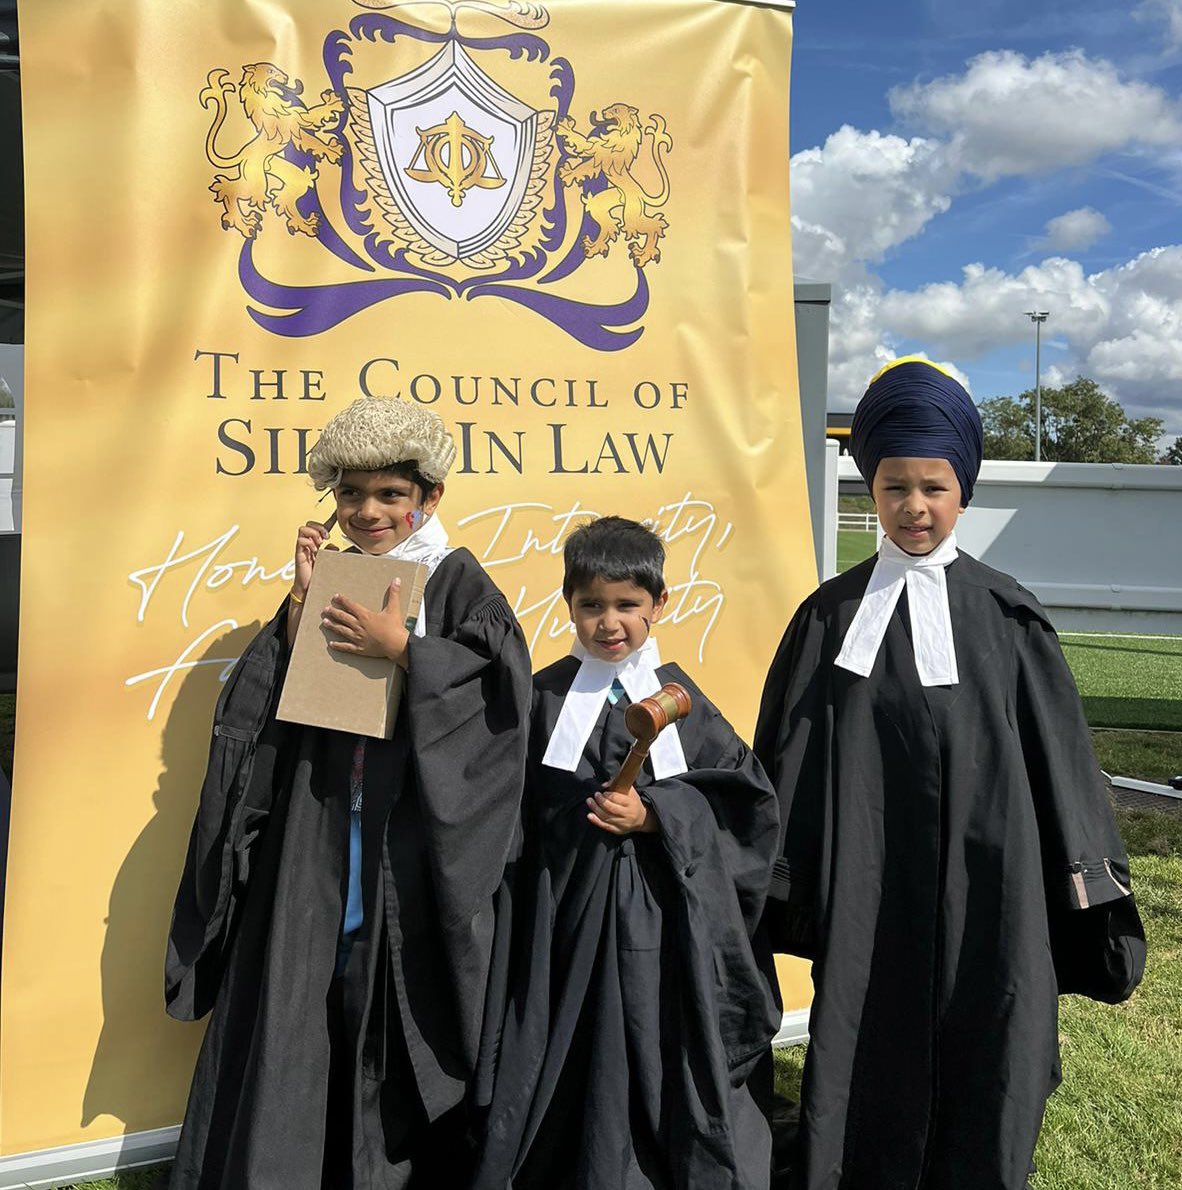 Our future! @sikhsinlaw investing in a better tomorrow! 

@TheInnerTemple @middletemple @HonSocGraysInn @lincolnsinn @TheLawSociety @thebarcouncil @JudiciaryUK 

@SinghBarrister1 @LookASingh @SikhPA